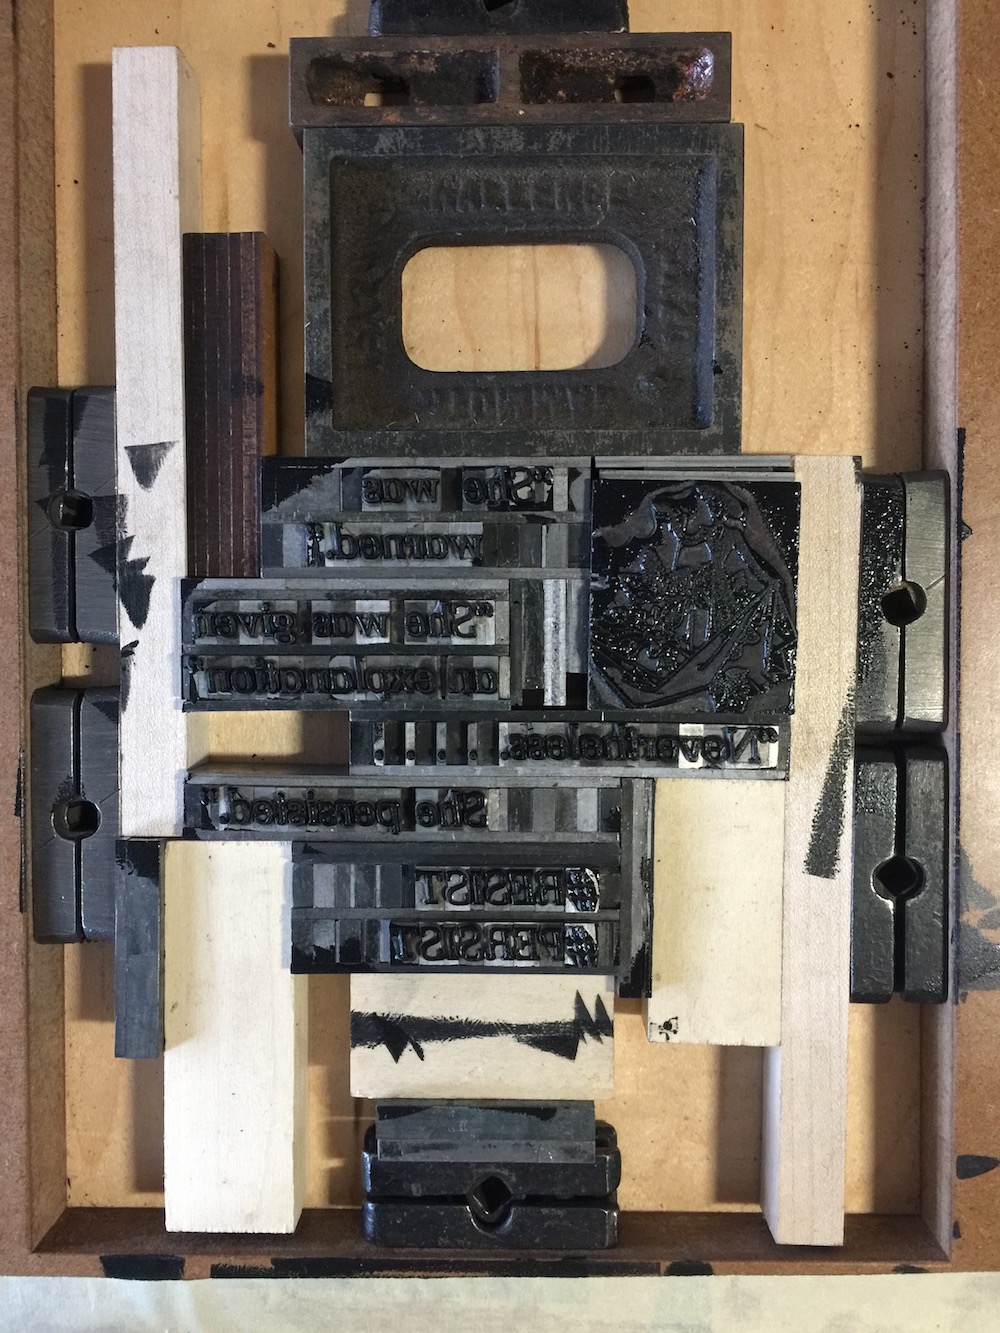 A printing project locked up in the frame using furniture and quoins.